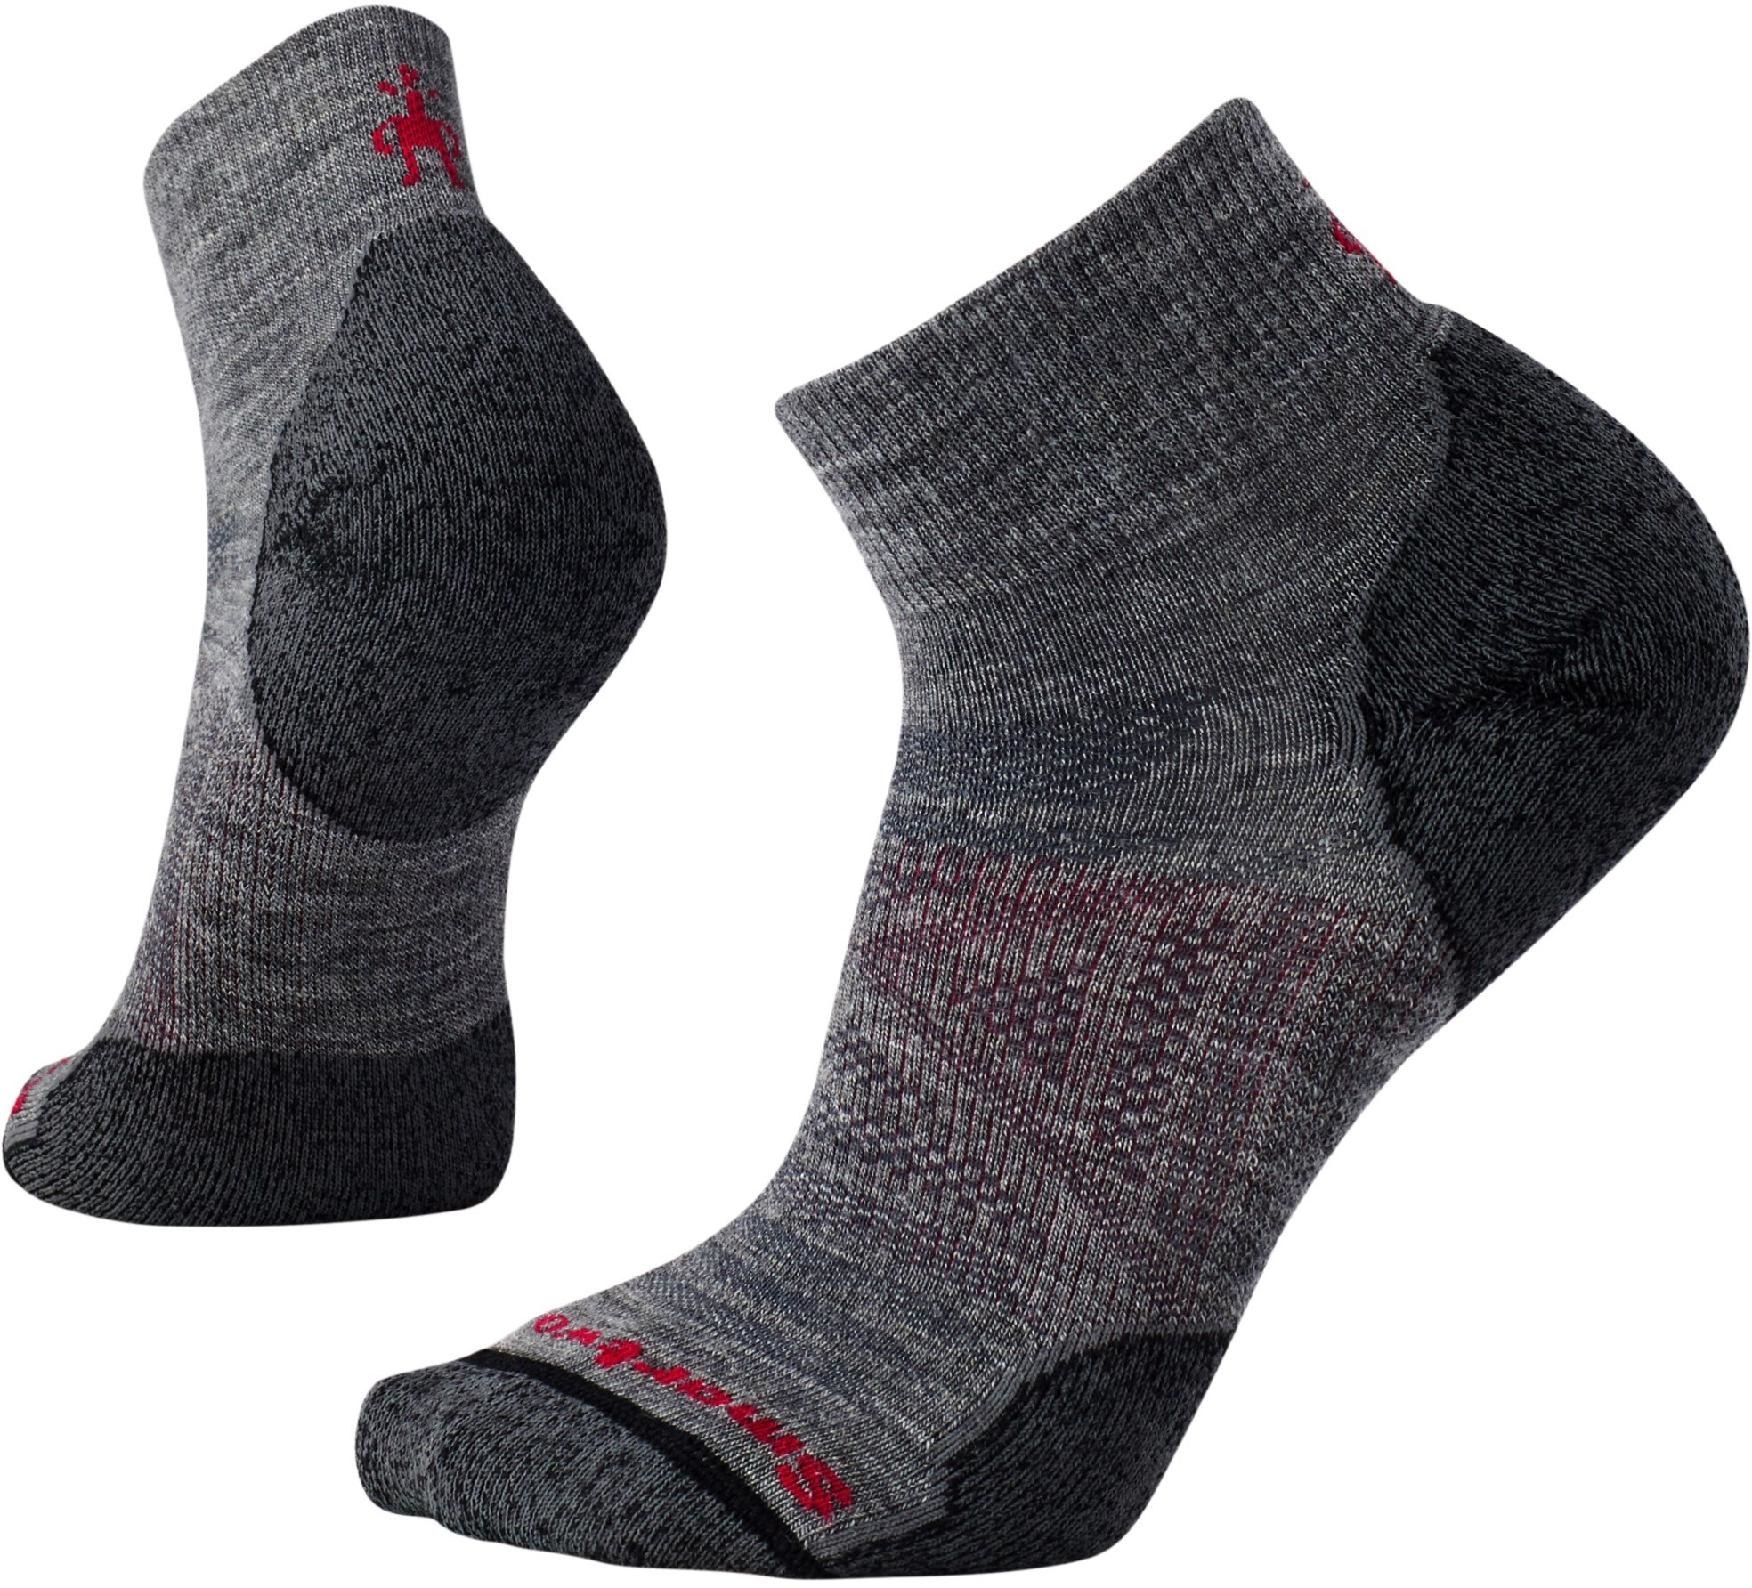 The Smartwool ankle socks in gray with a red logo print across the toes 